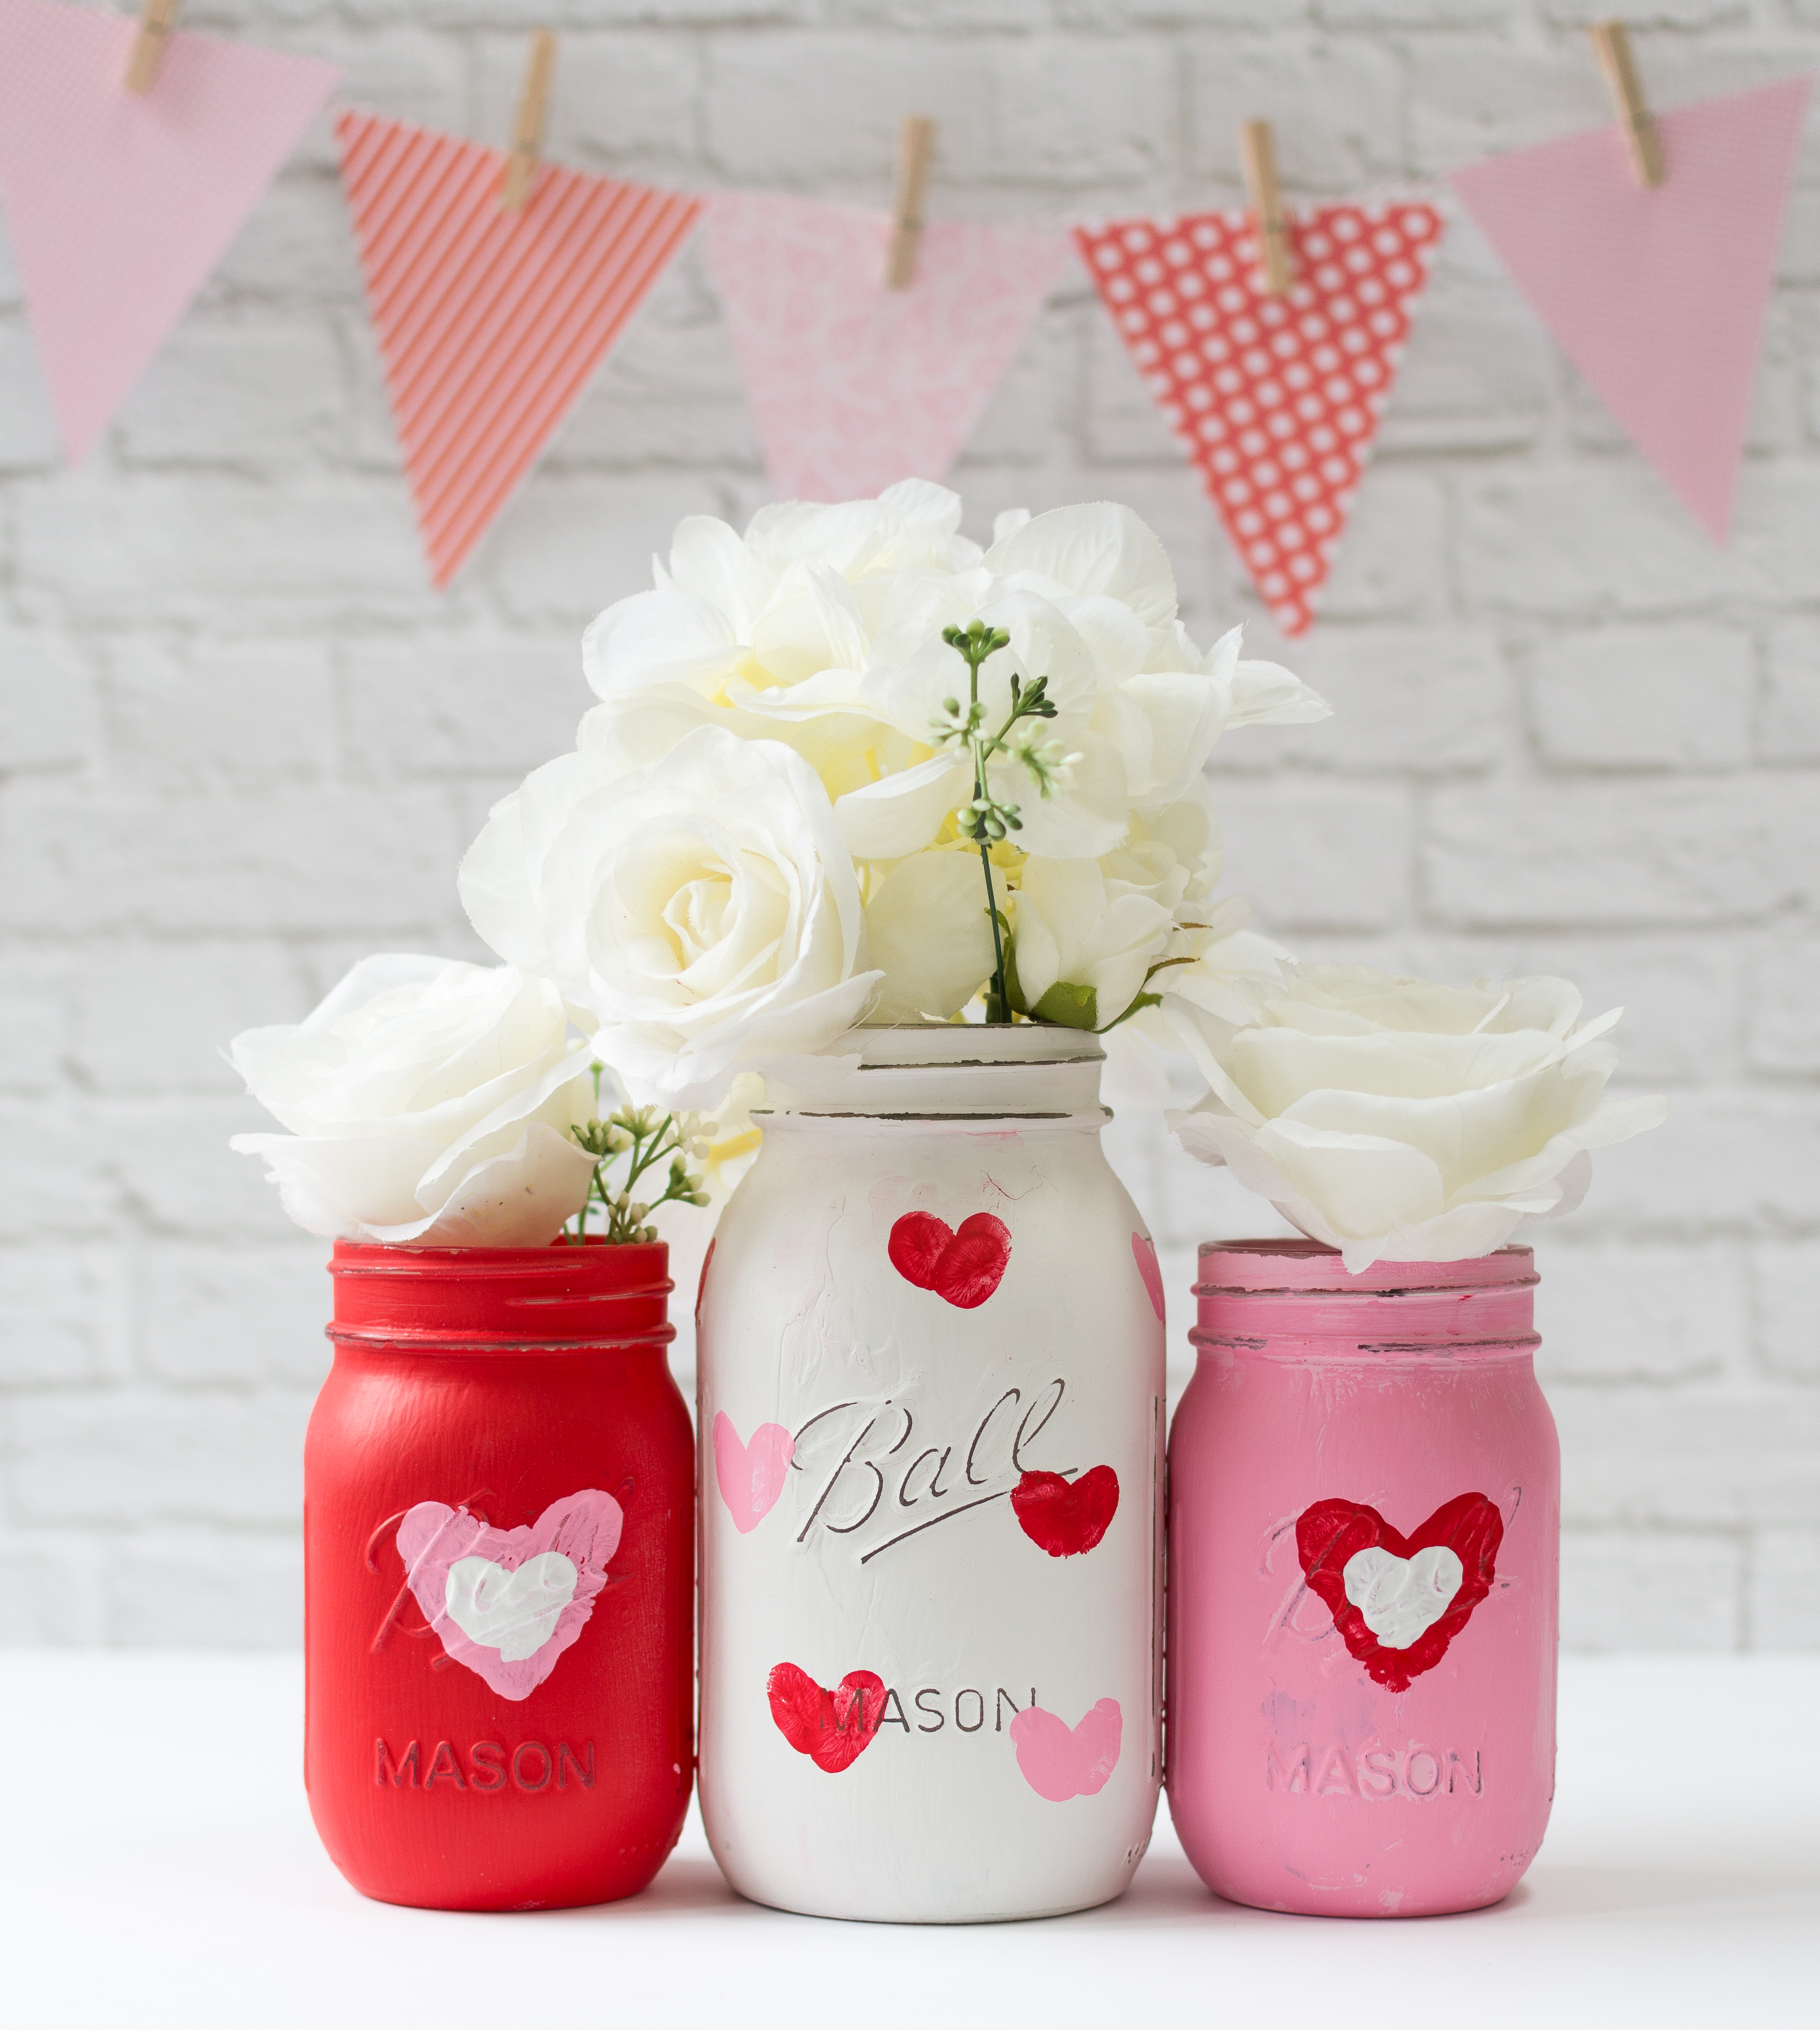 11 Adorable Valentine's Day Crafts for Kids